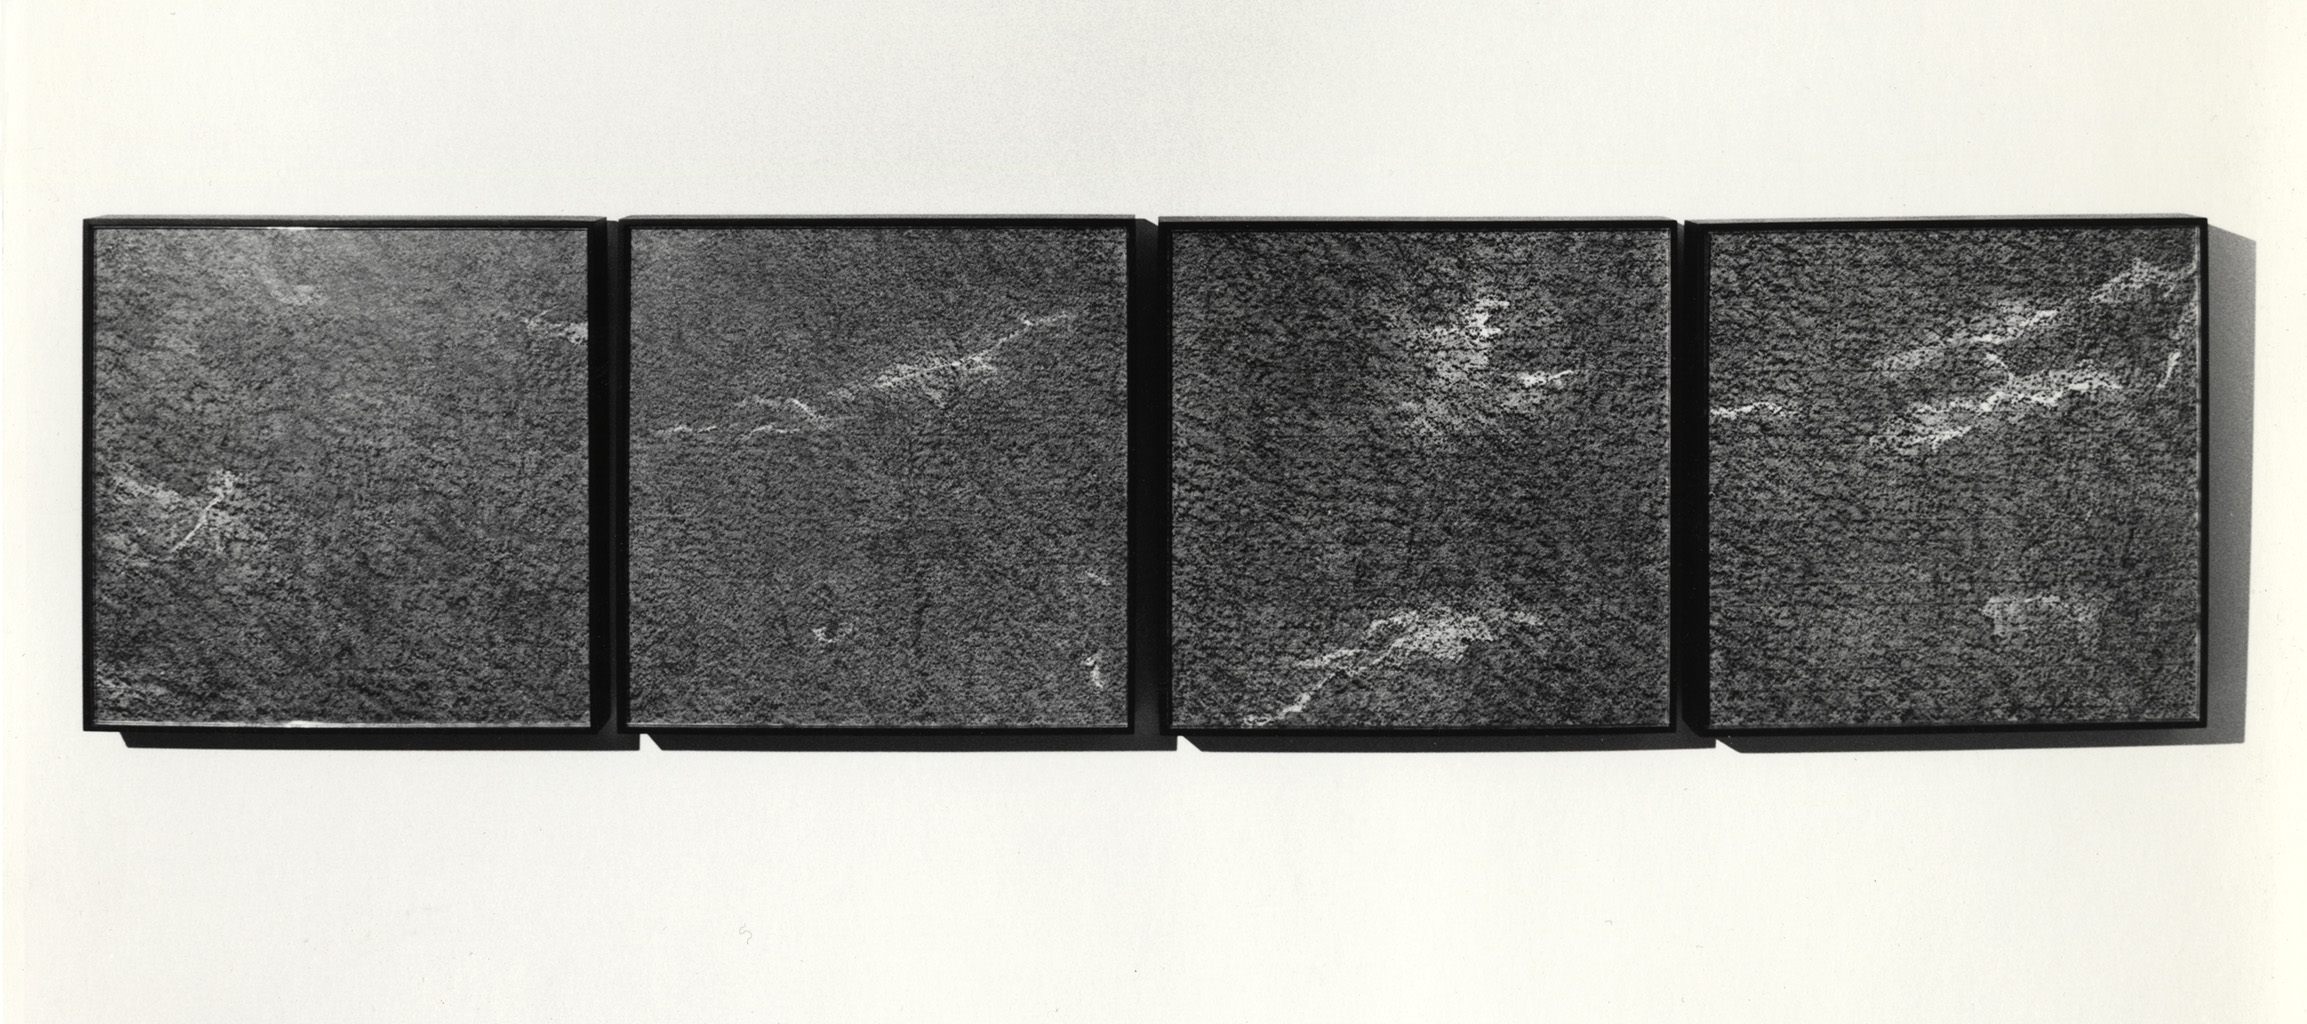 Scanning Sequence, 1969–70